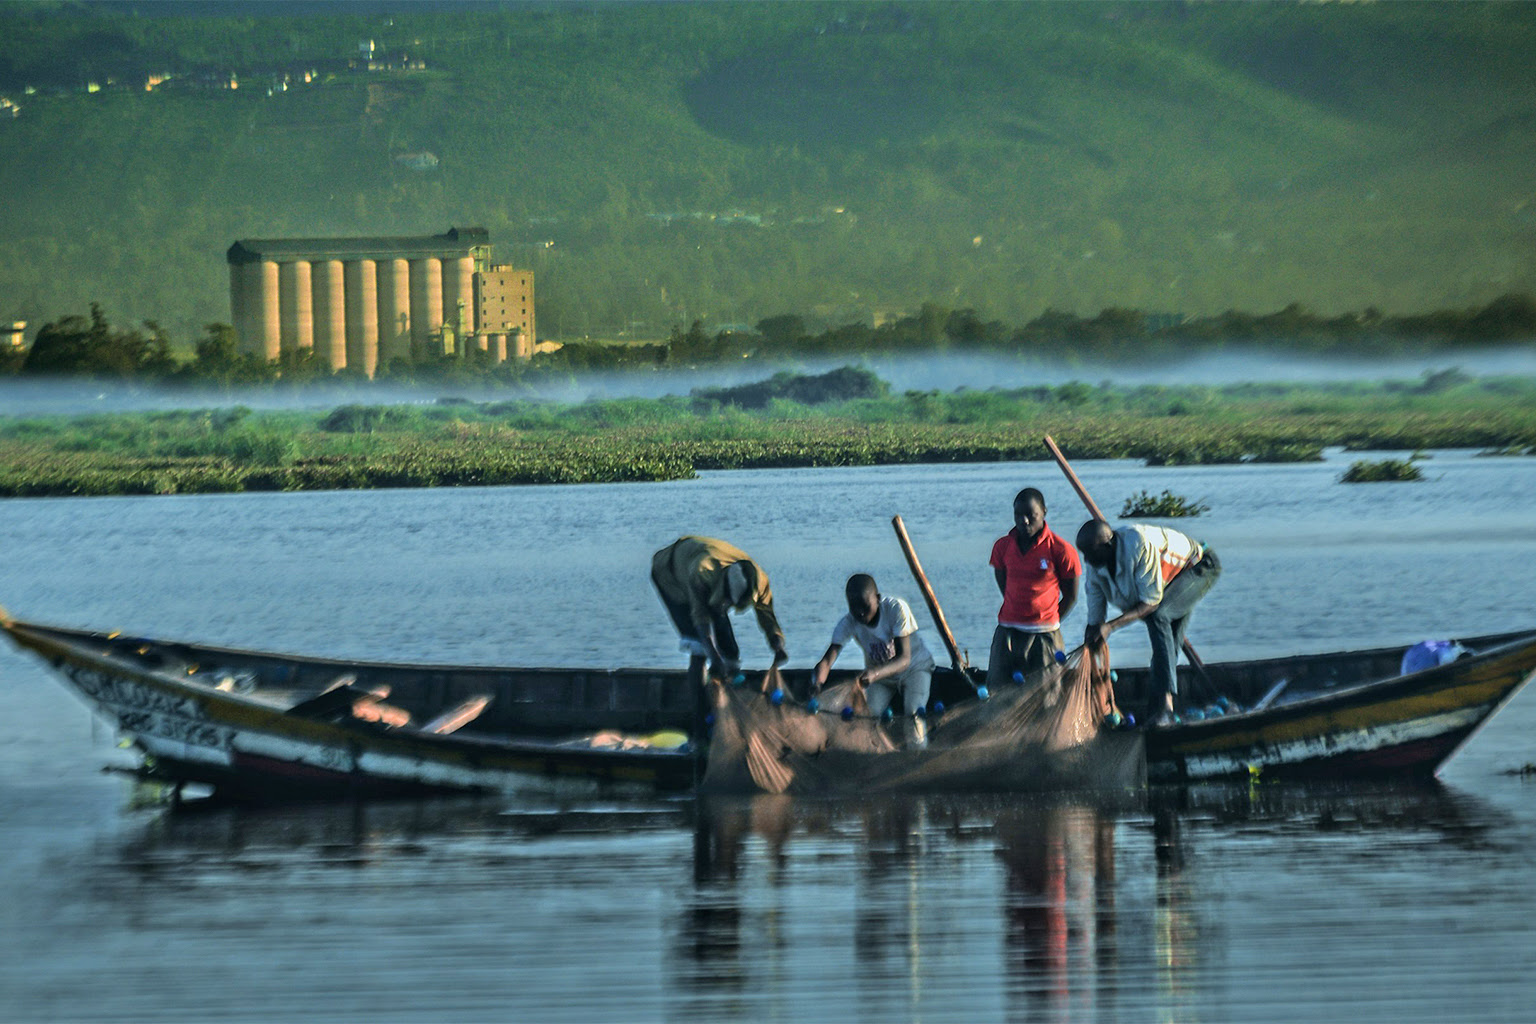 Fishermen gathering their catch early in the morning on Lake Victoria.